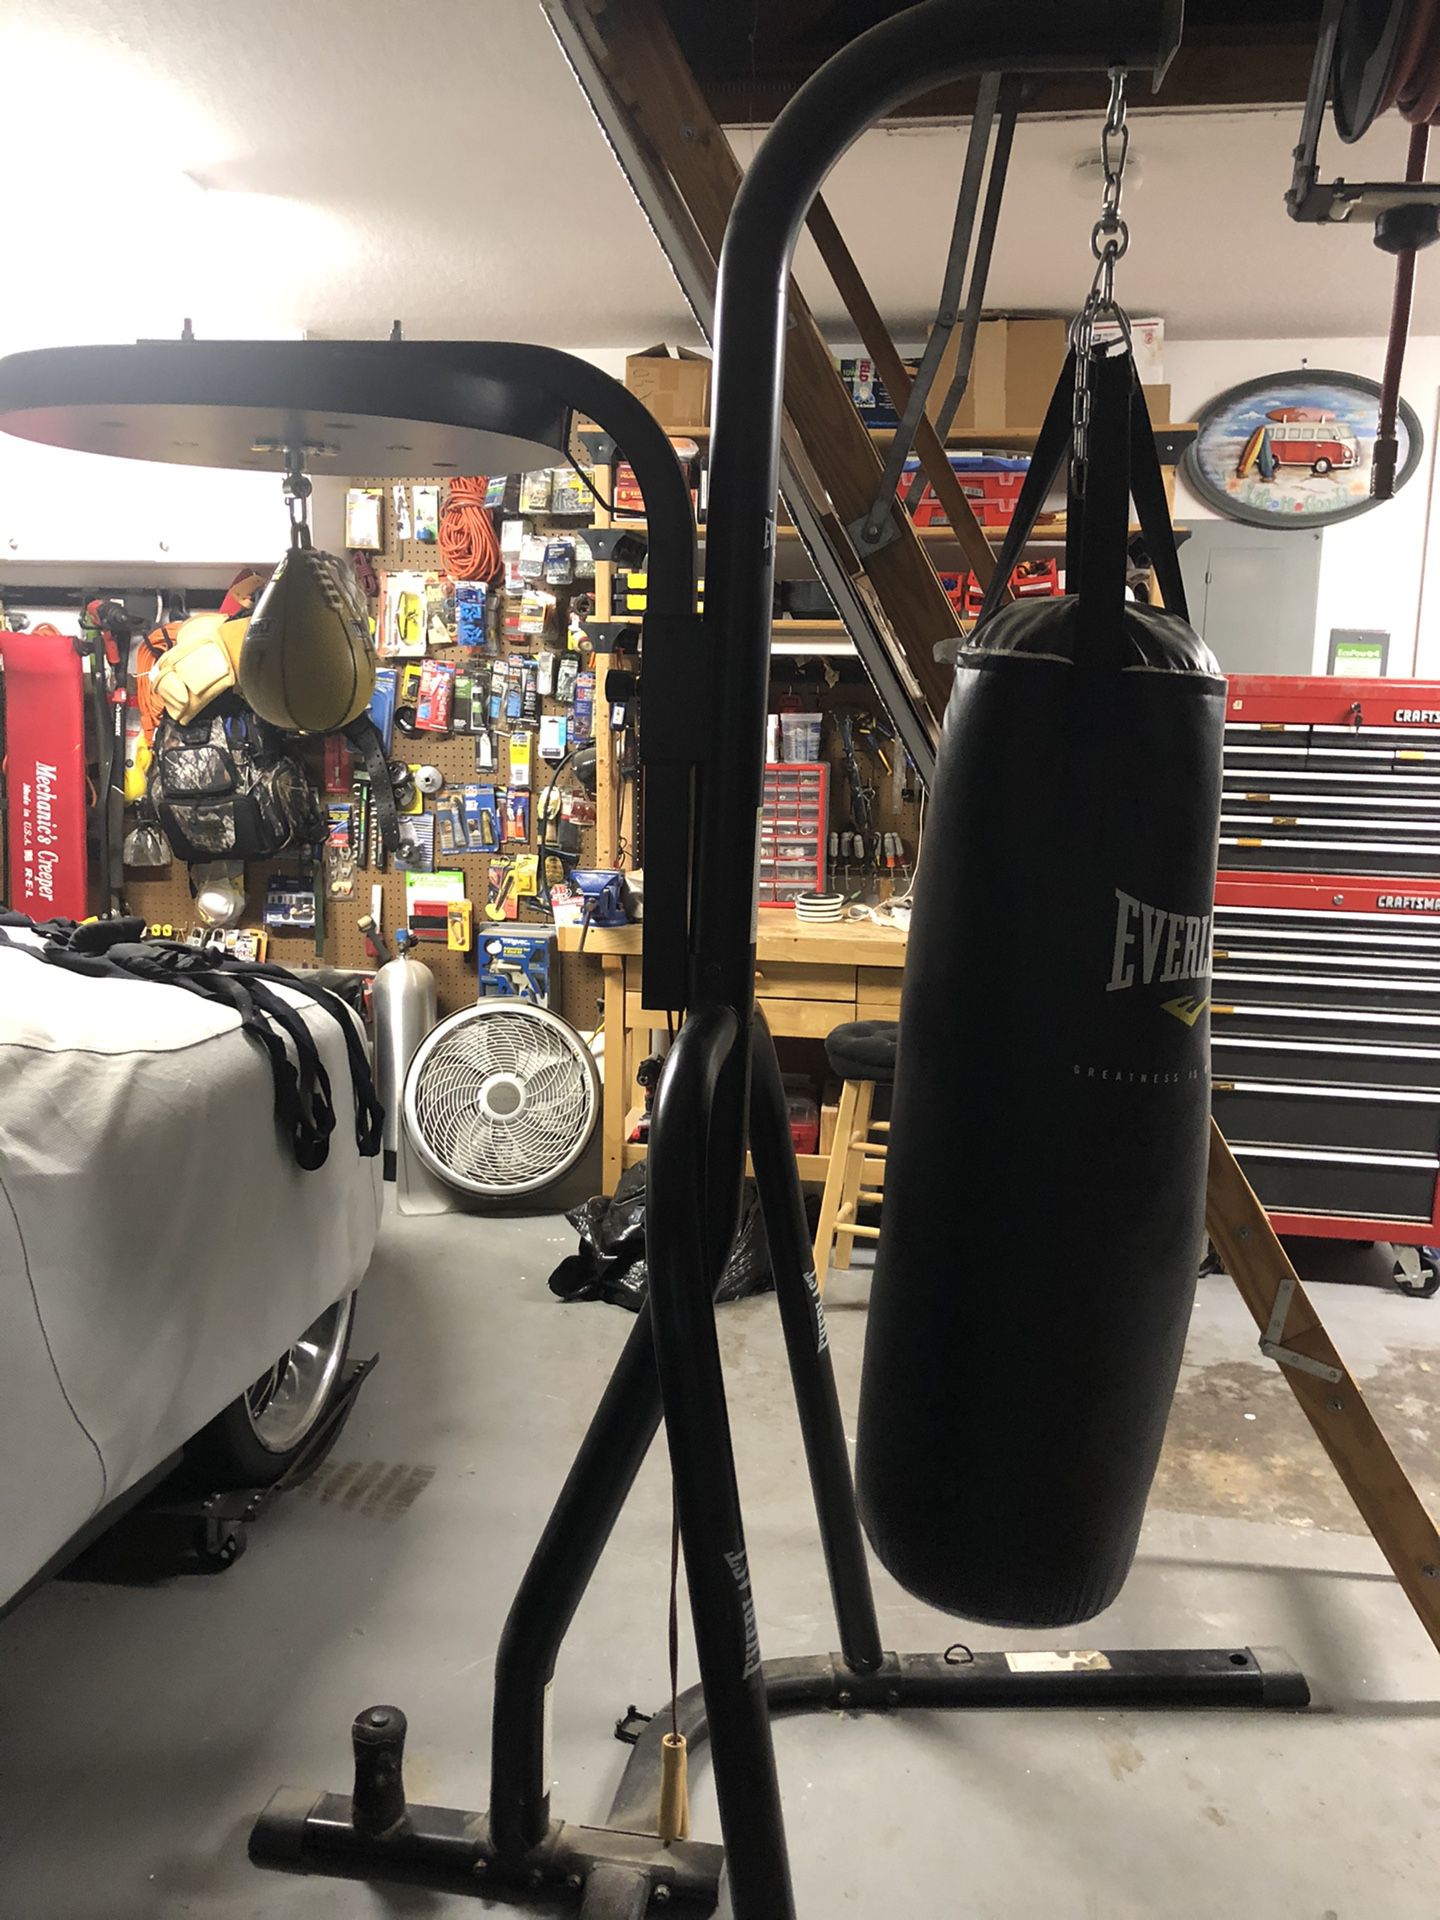 Everlast home boxing gym - includes heavy bag and speed bag in exc cond!